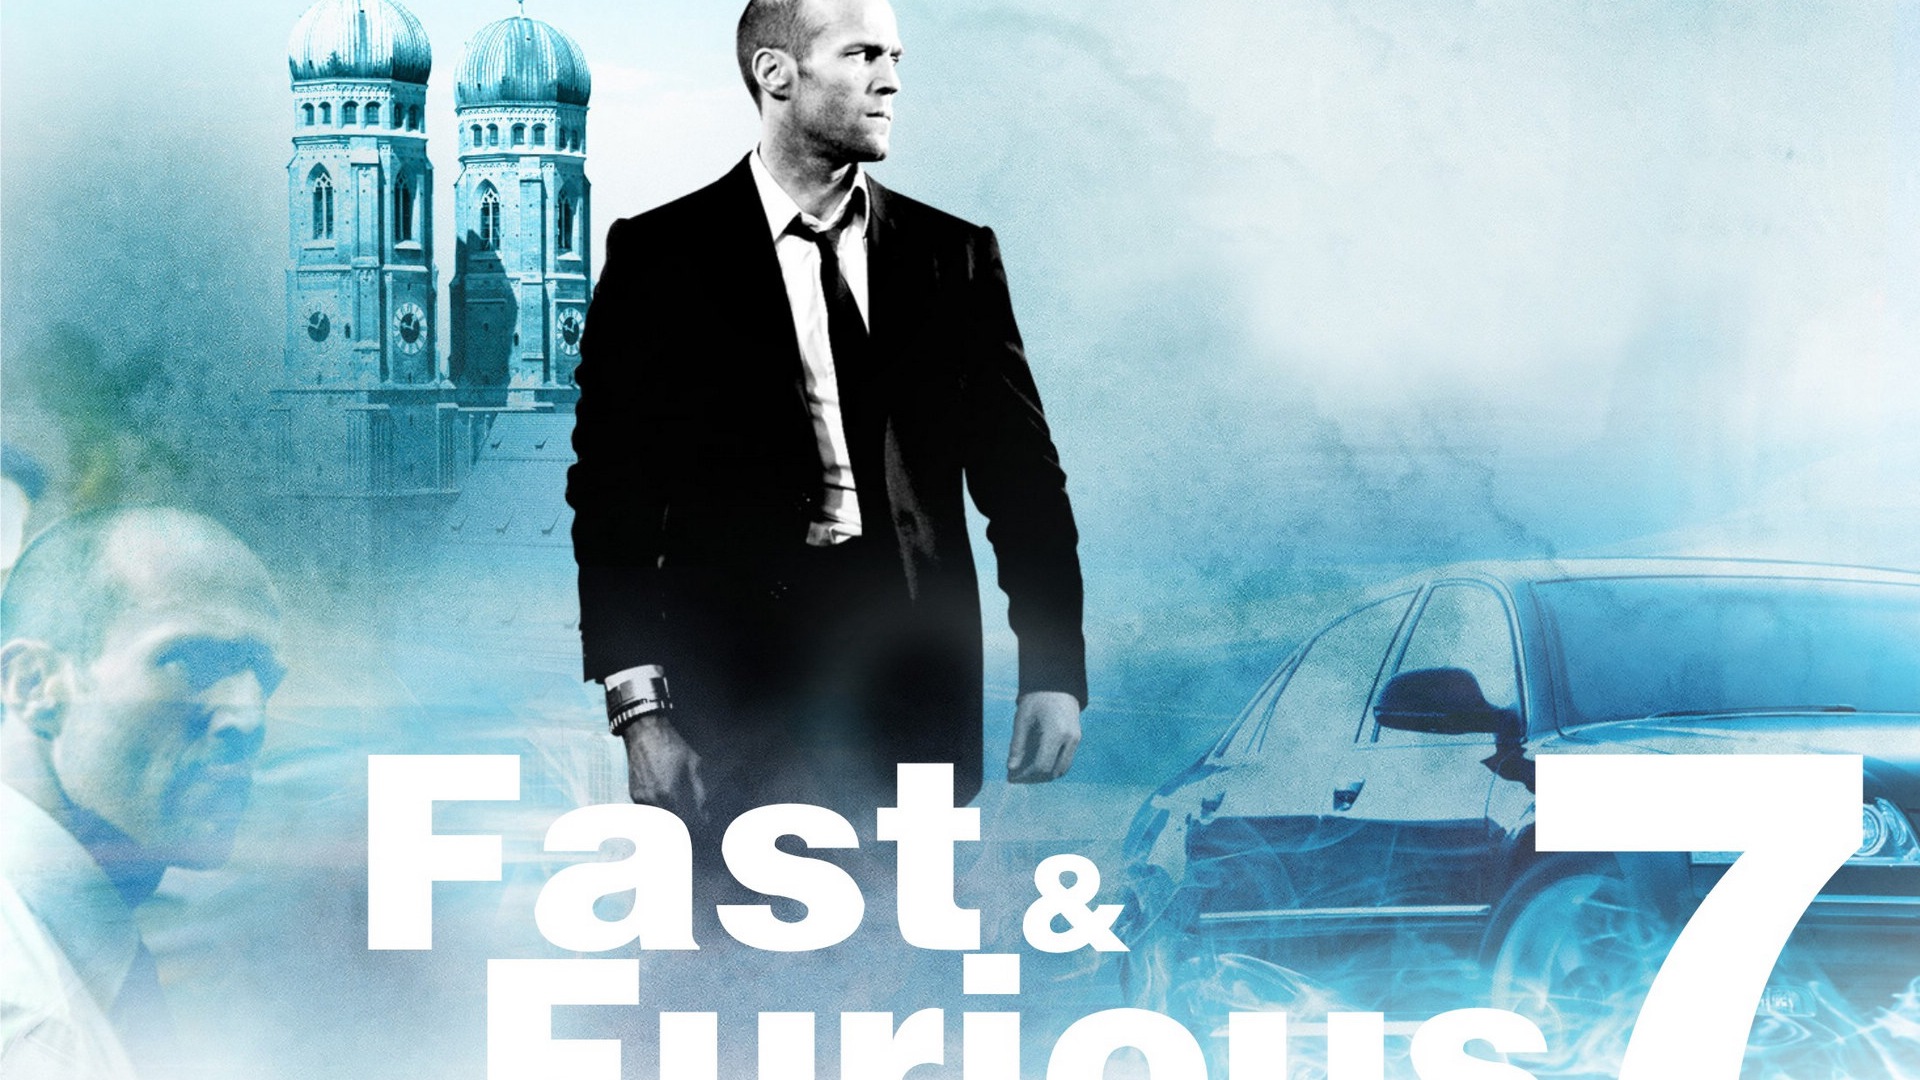 Fast and Furious 7 HD movie wallpapers #17 - 1920x1080